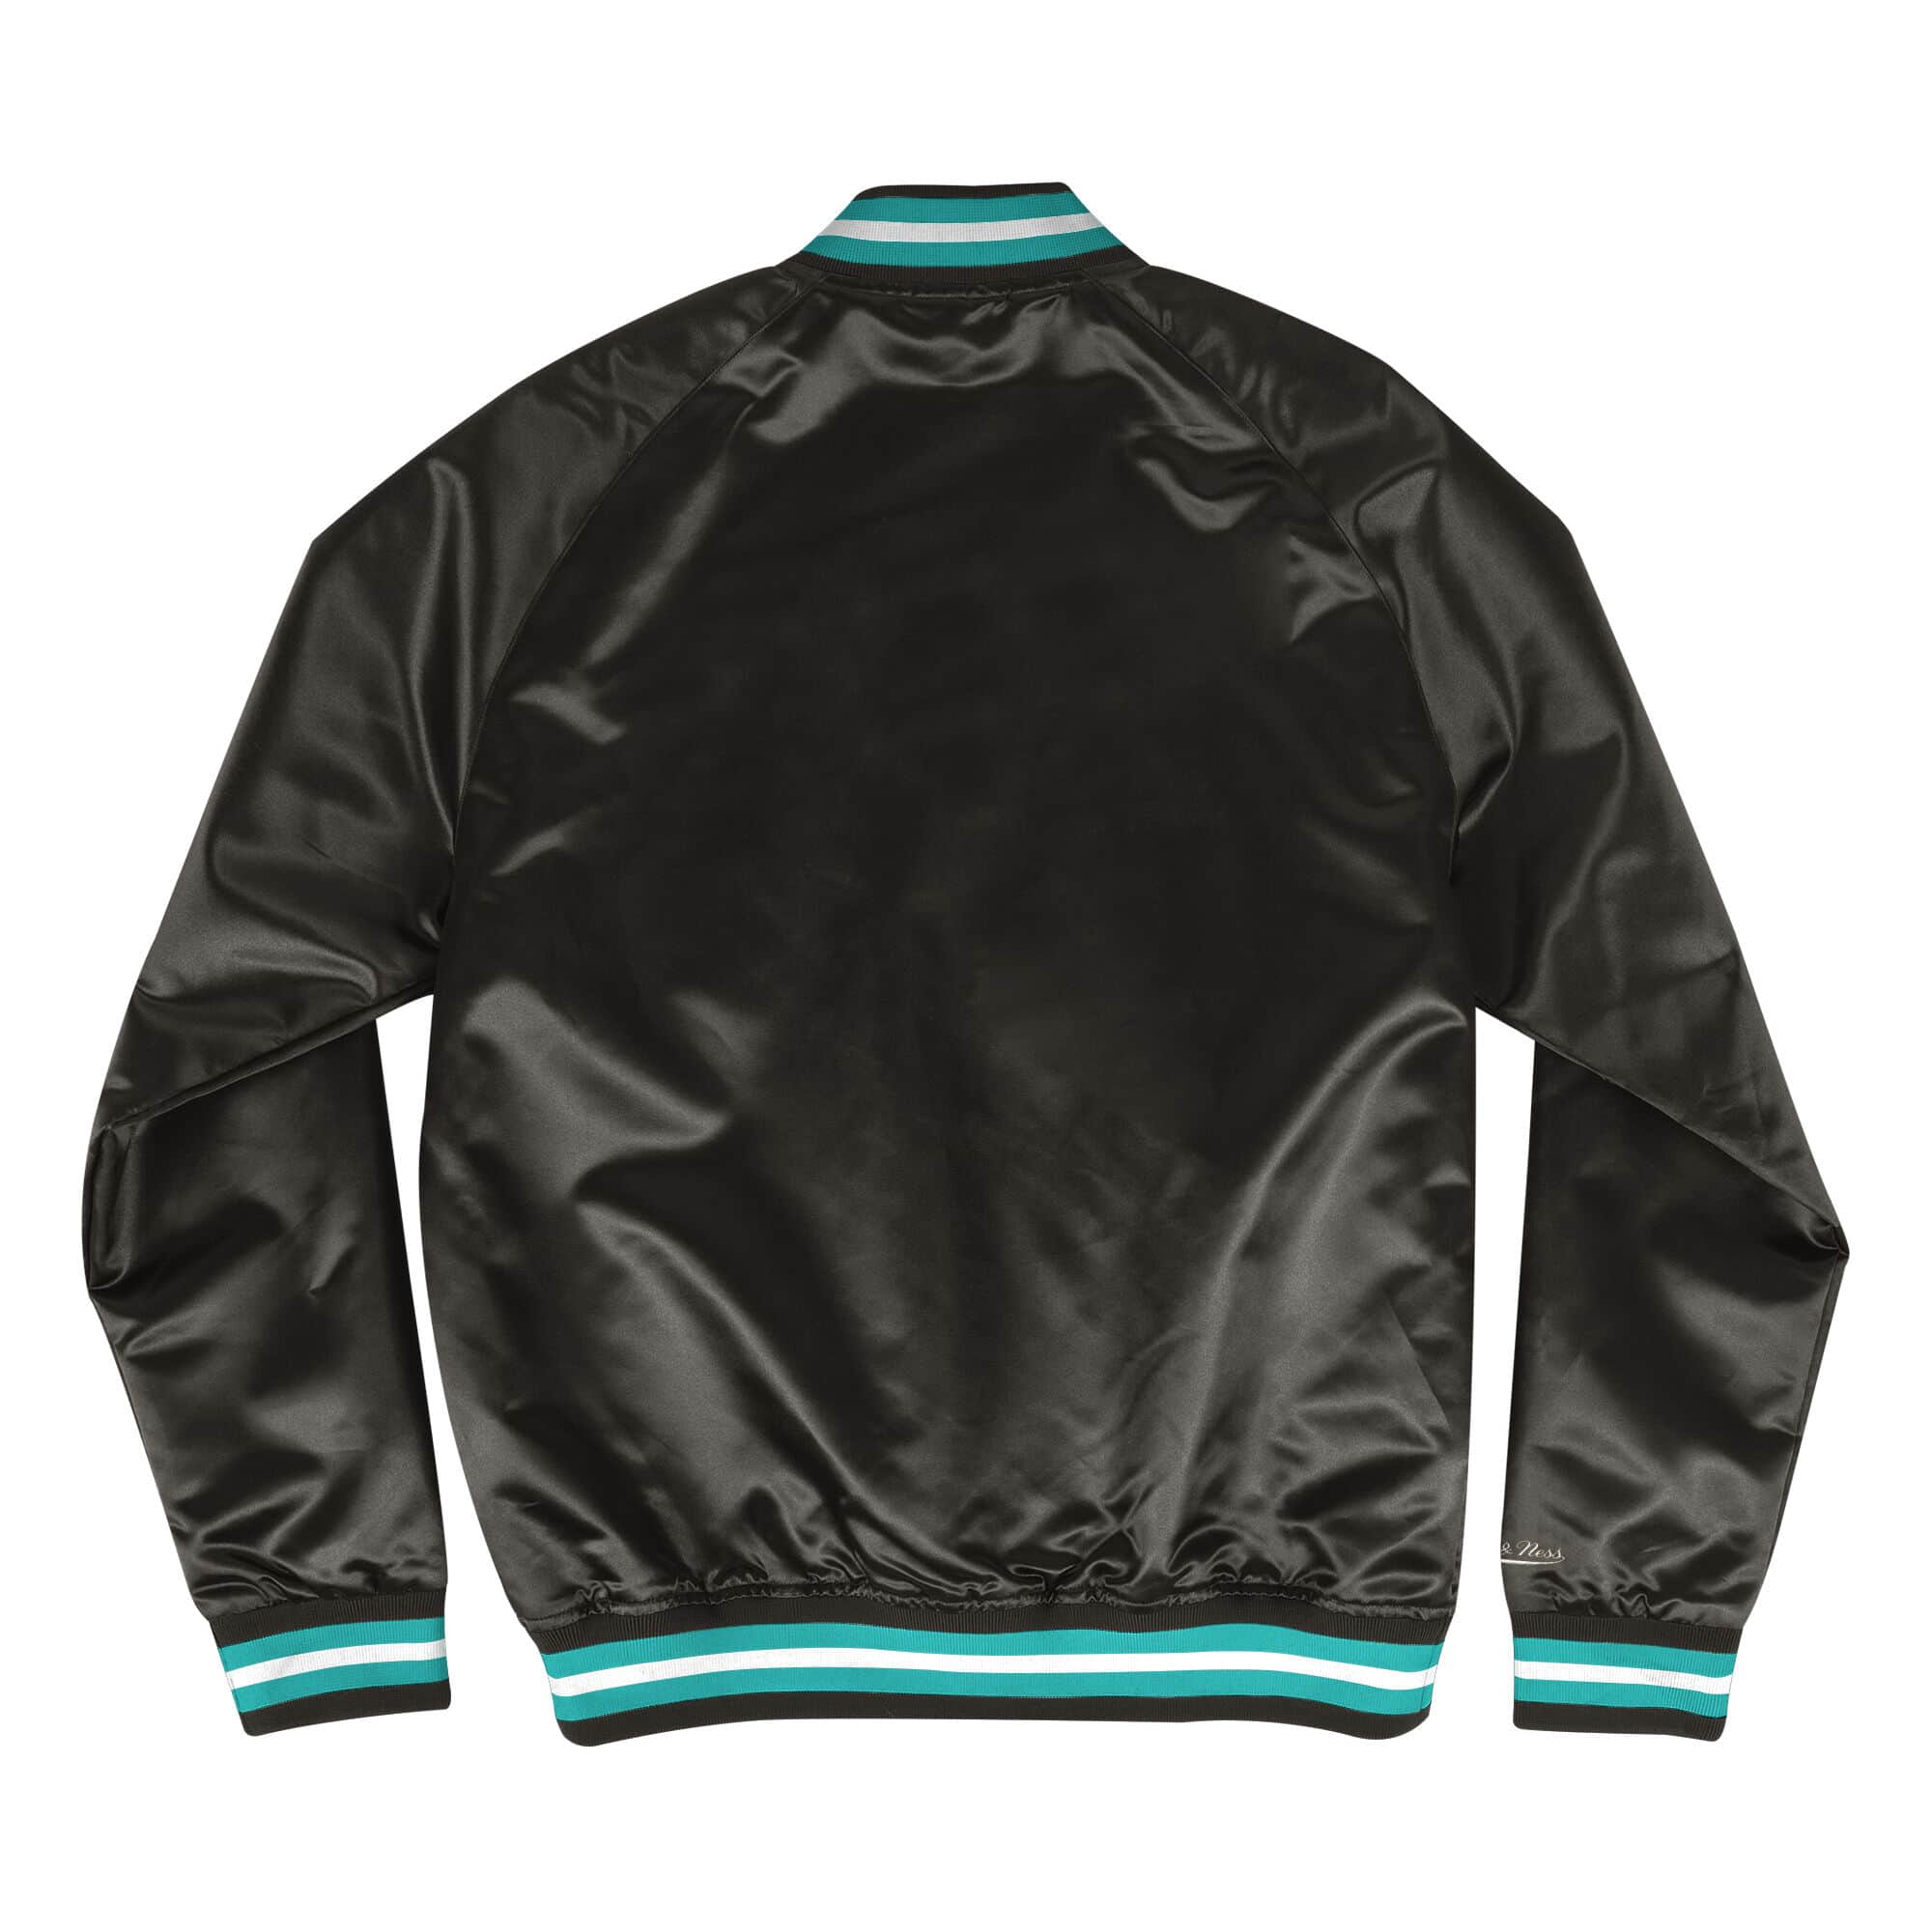 mitchell and ness vancouver grizzlies jacket